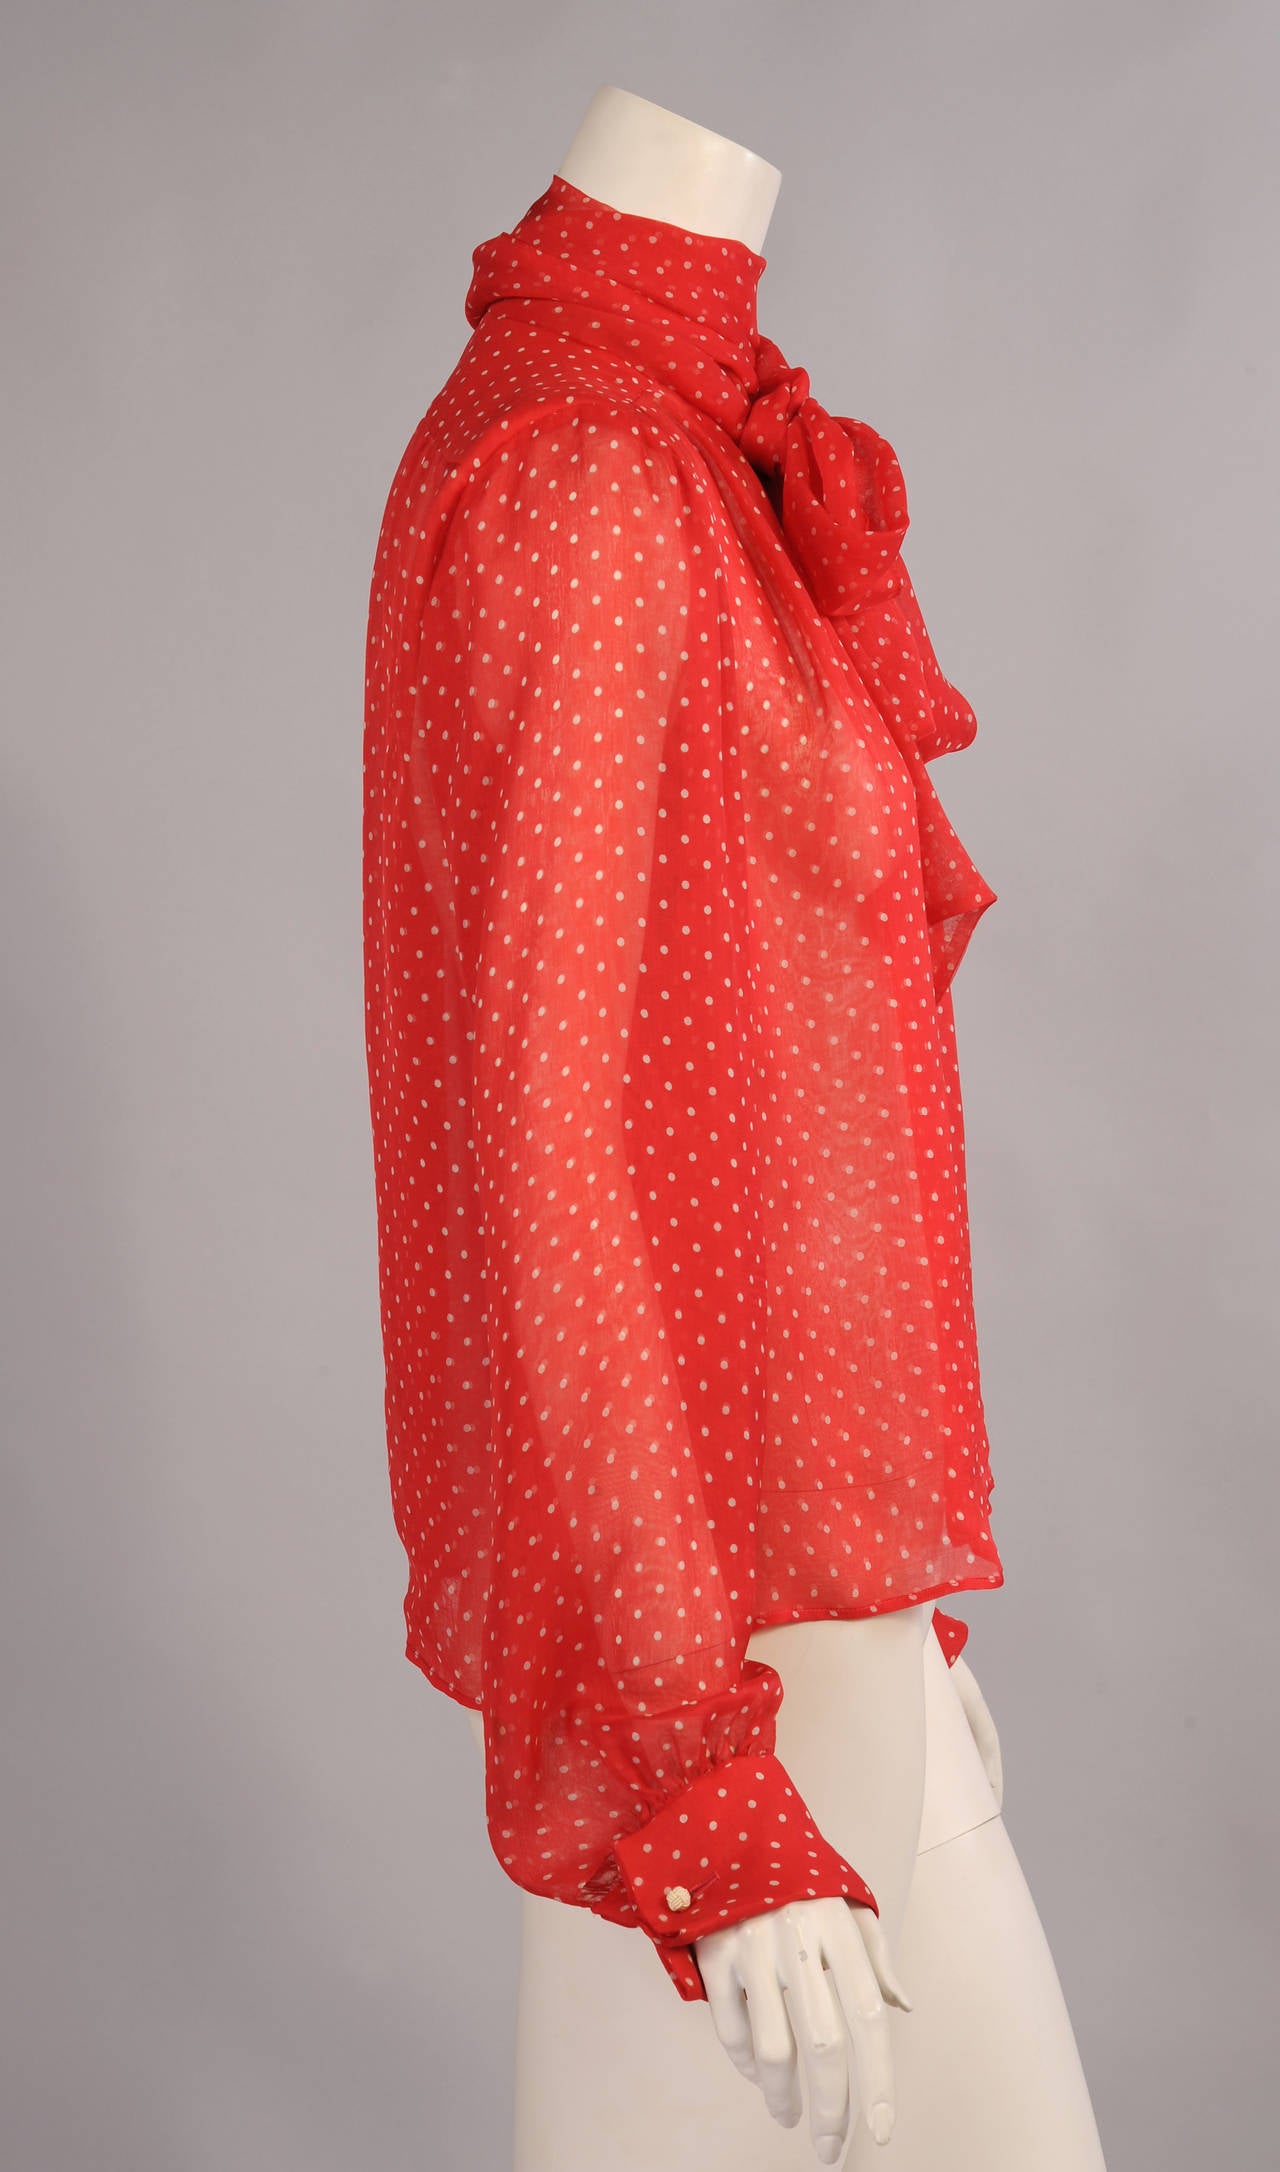 Yves Saint Laurent Red and White Polka Dot Chiffon Haute Couture Blouse ...